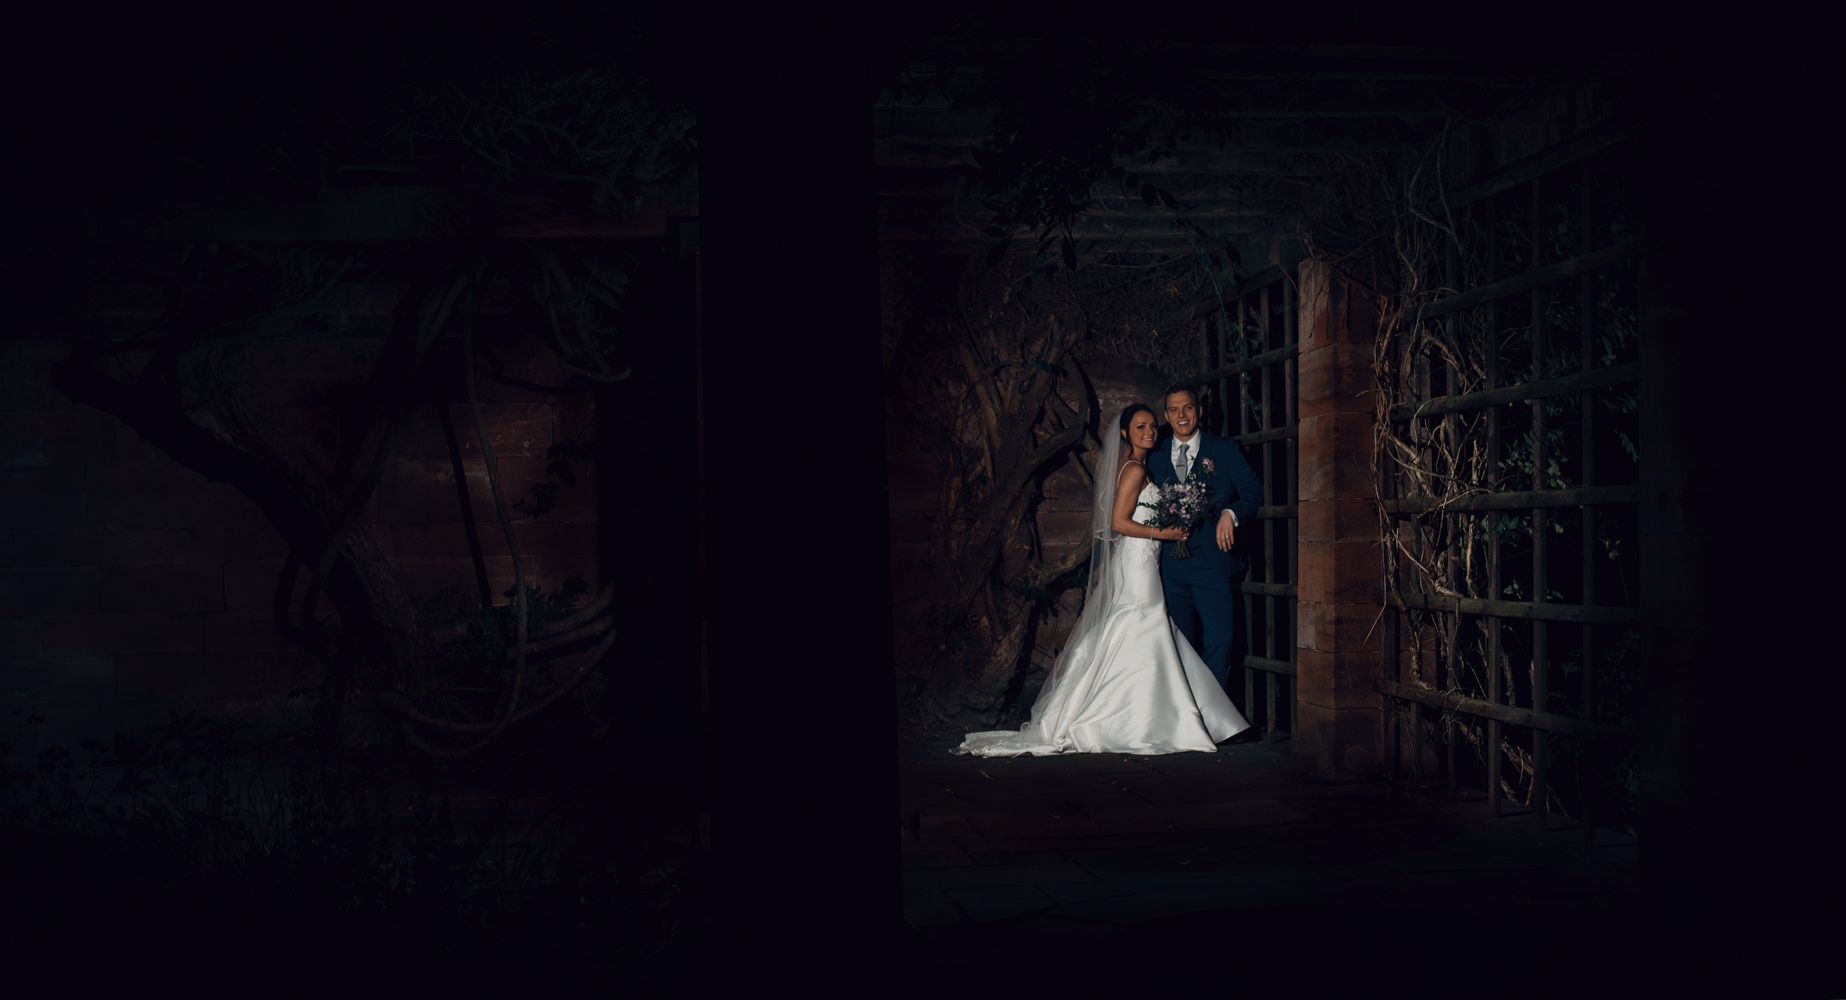 A portrait image of the bride and groom taken in the dark at Inglewood Manor